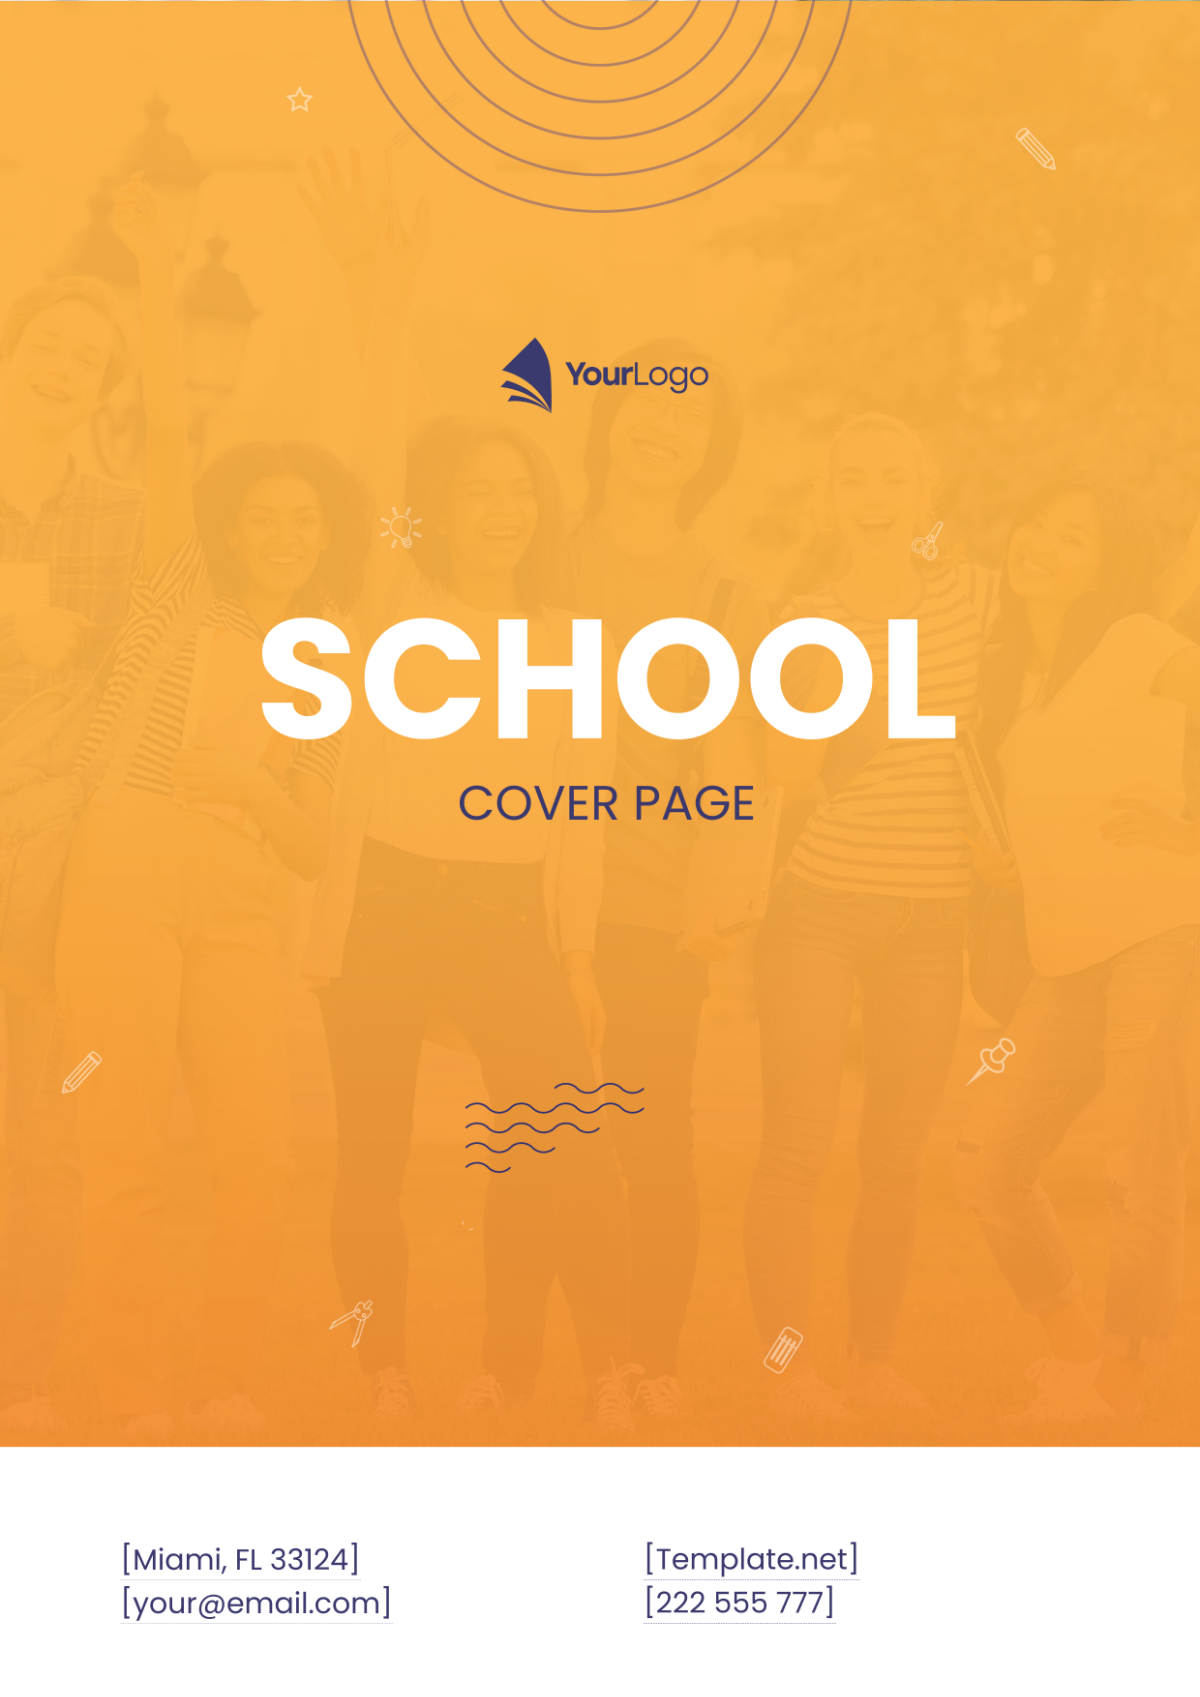 Free School Cover Page Logo Template